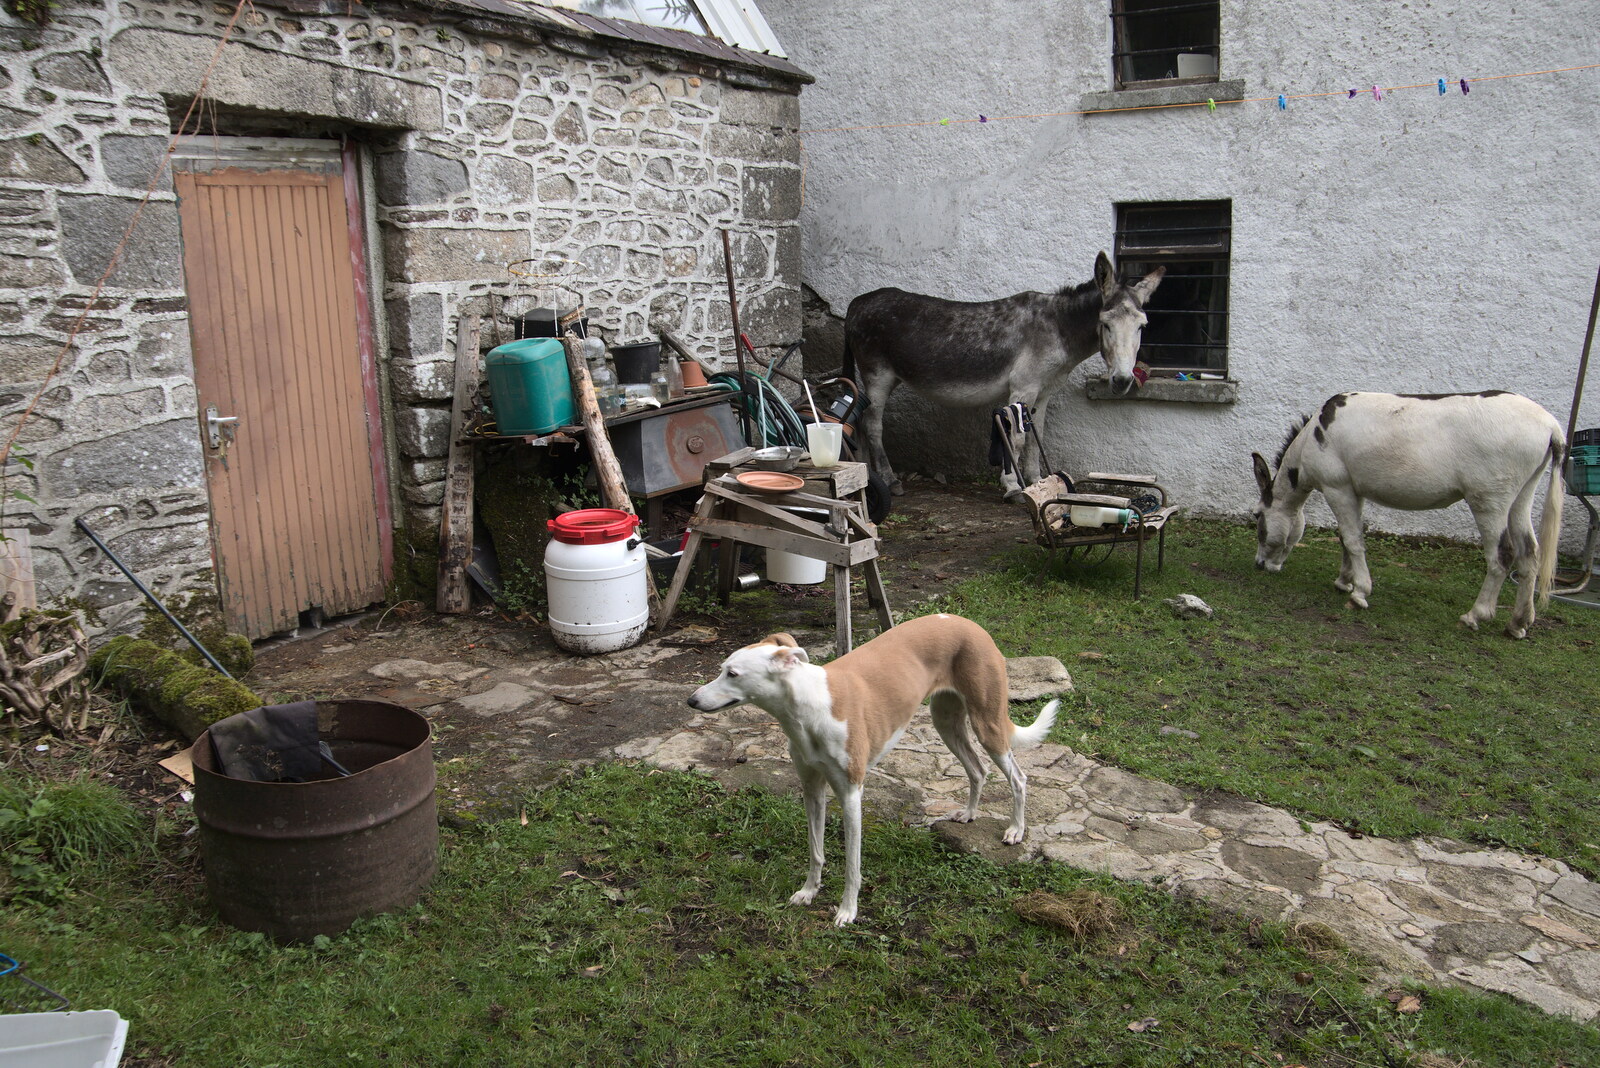 A dog and donkeys from A Trip to Noddy's, and Dublin City Centre, Wicklow and Dublin, Ireland - 16th August 2021